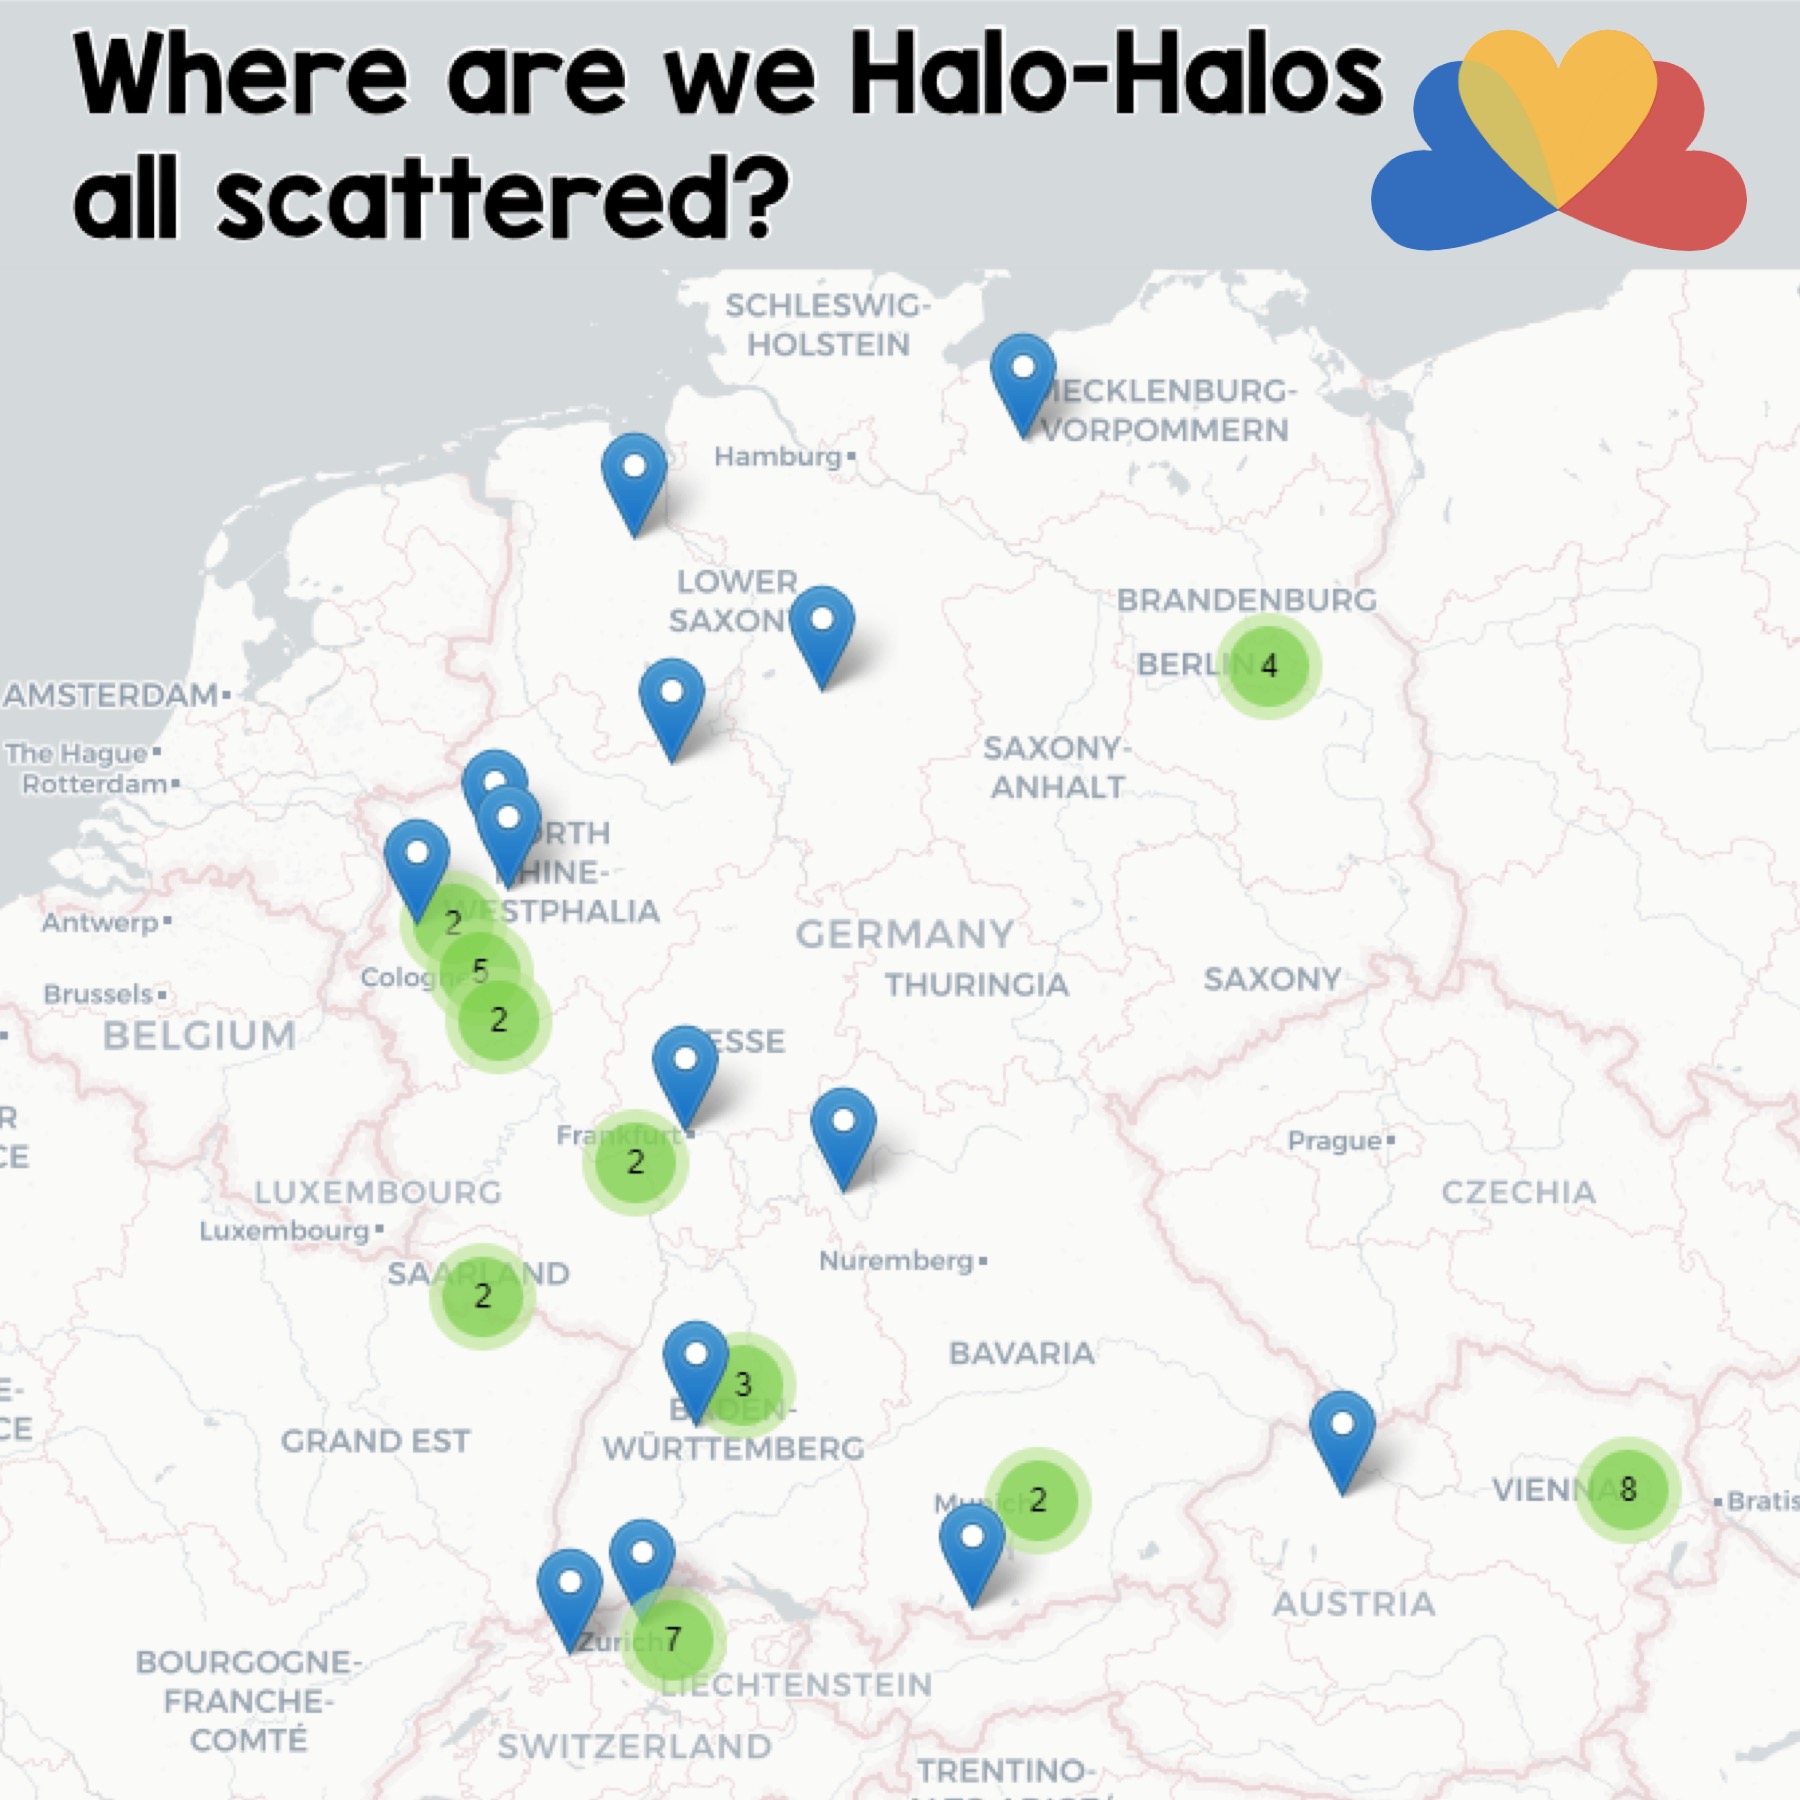 Where are all the Halo-Halos scattered across Europe?